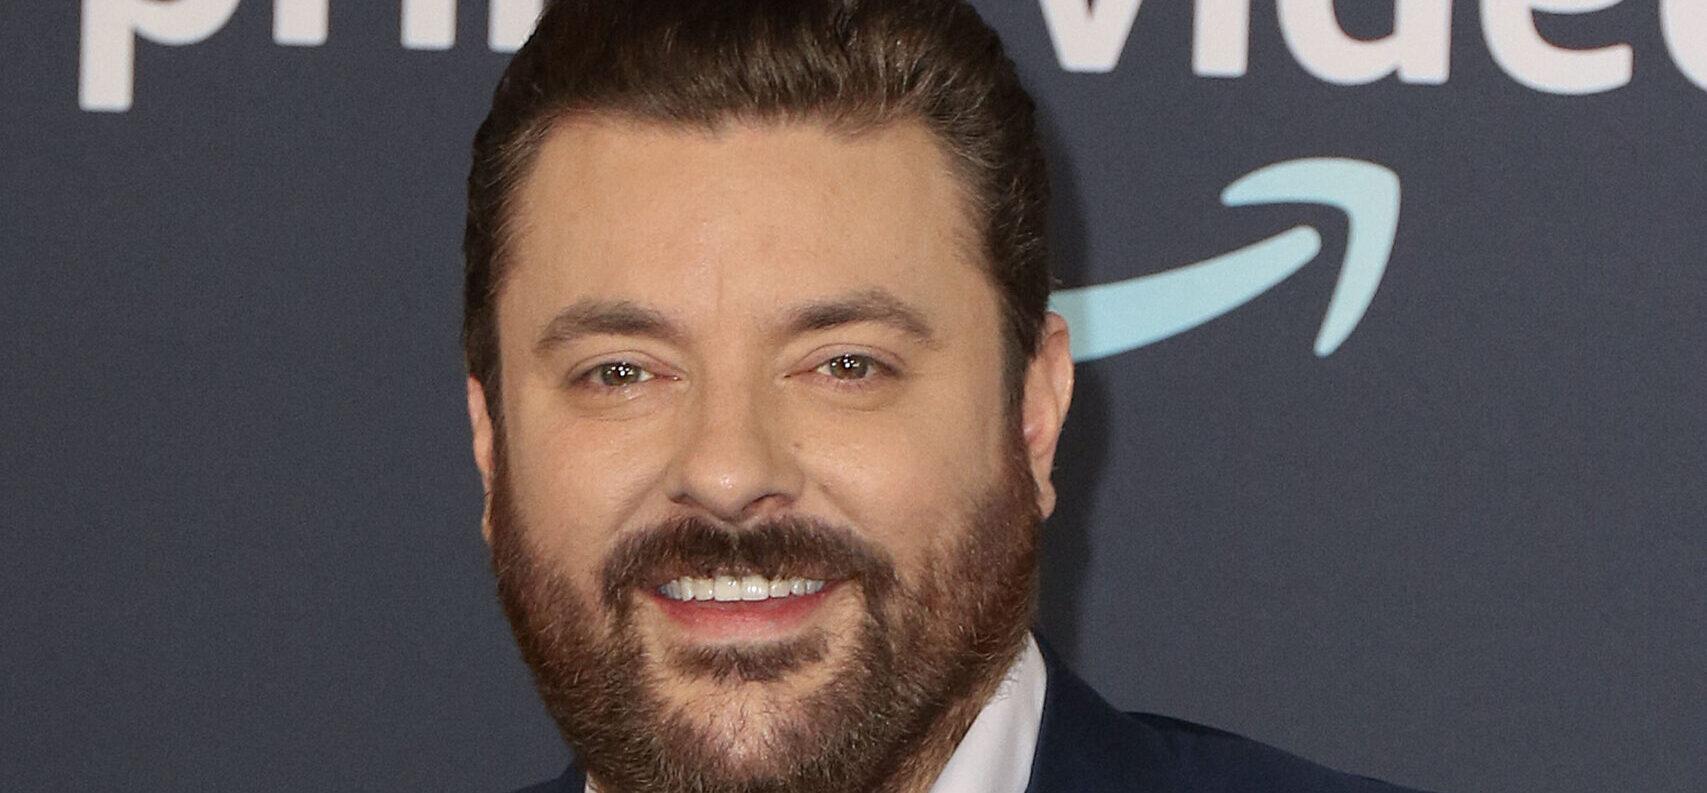 Country Star Chris Young Breaks His Silence On ‘Assault’ On An Officer Arrest